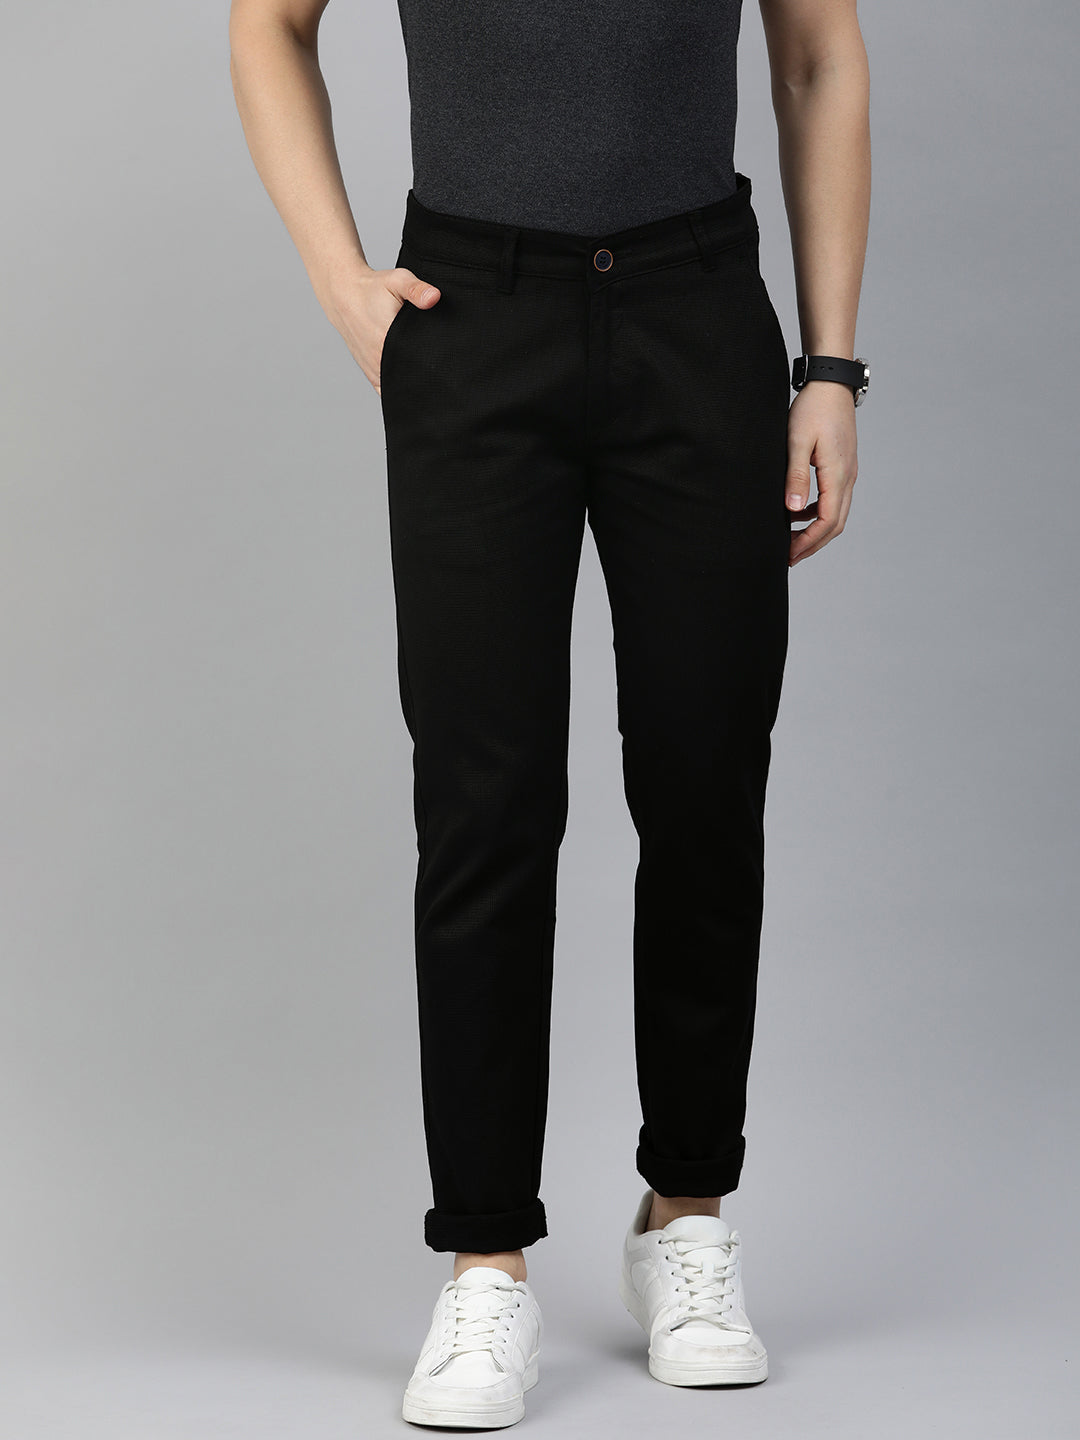 Majestic Man Casual textured Trouser - Black